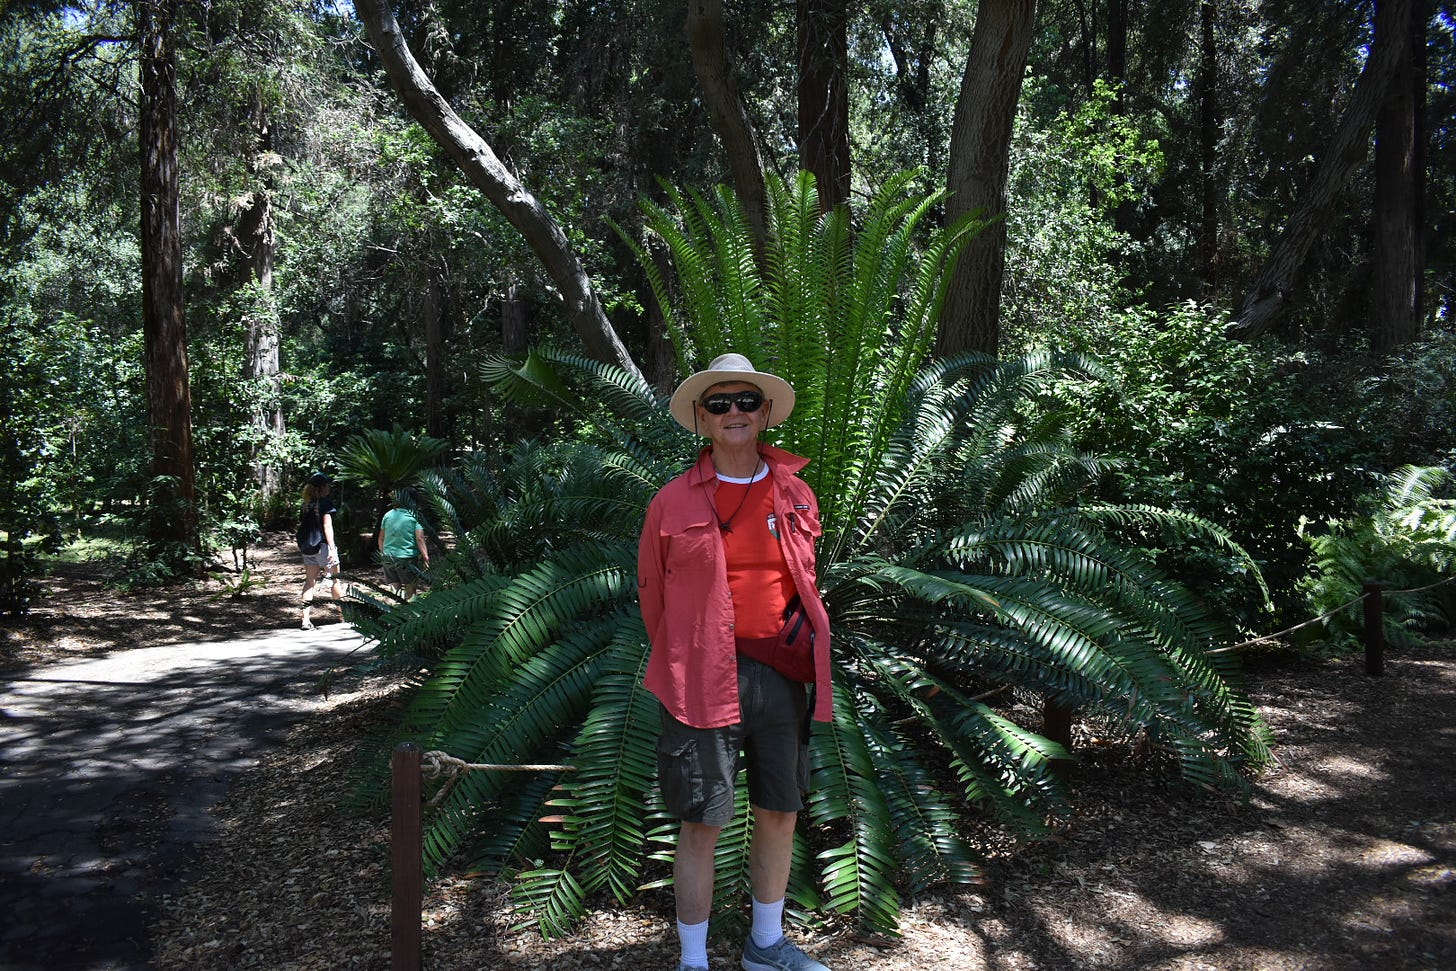 My father in a floppy hat standing in front of a HUGE fern, taller than he is